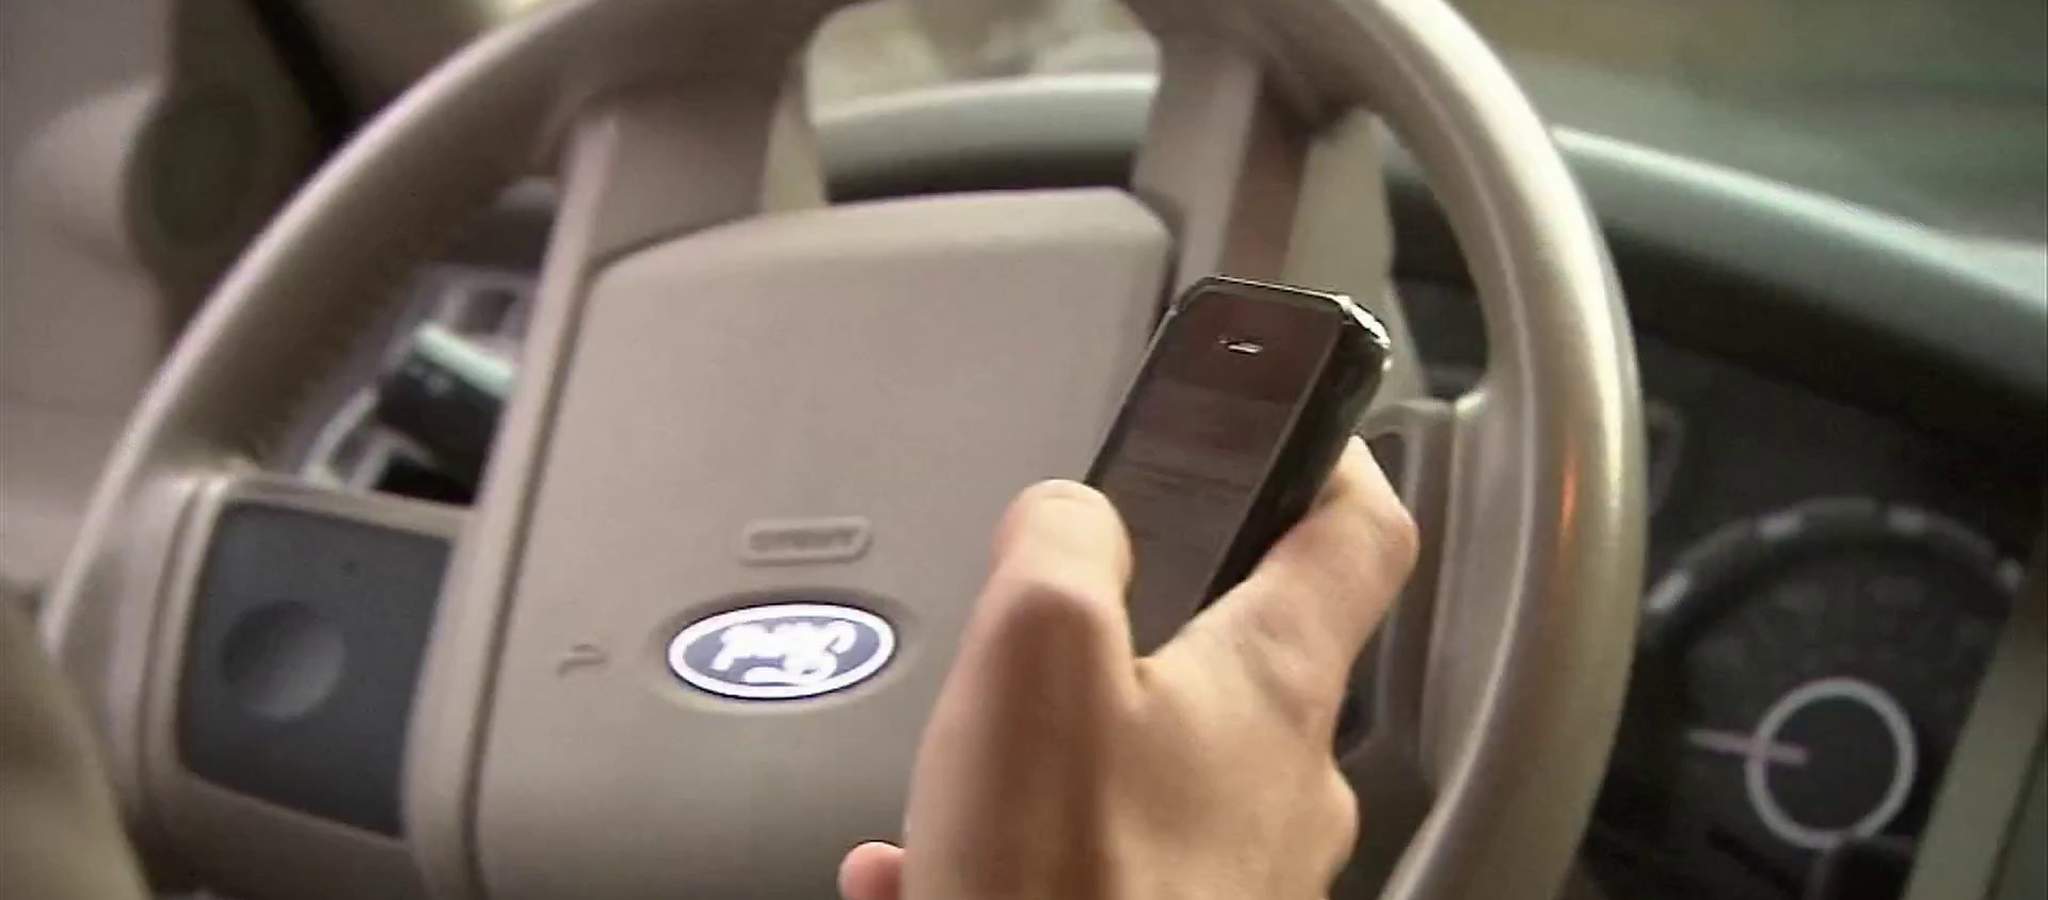 Data: Florida’s texting-while-driving law rarely enforced